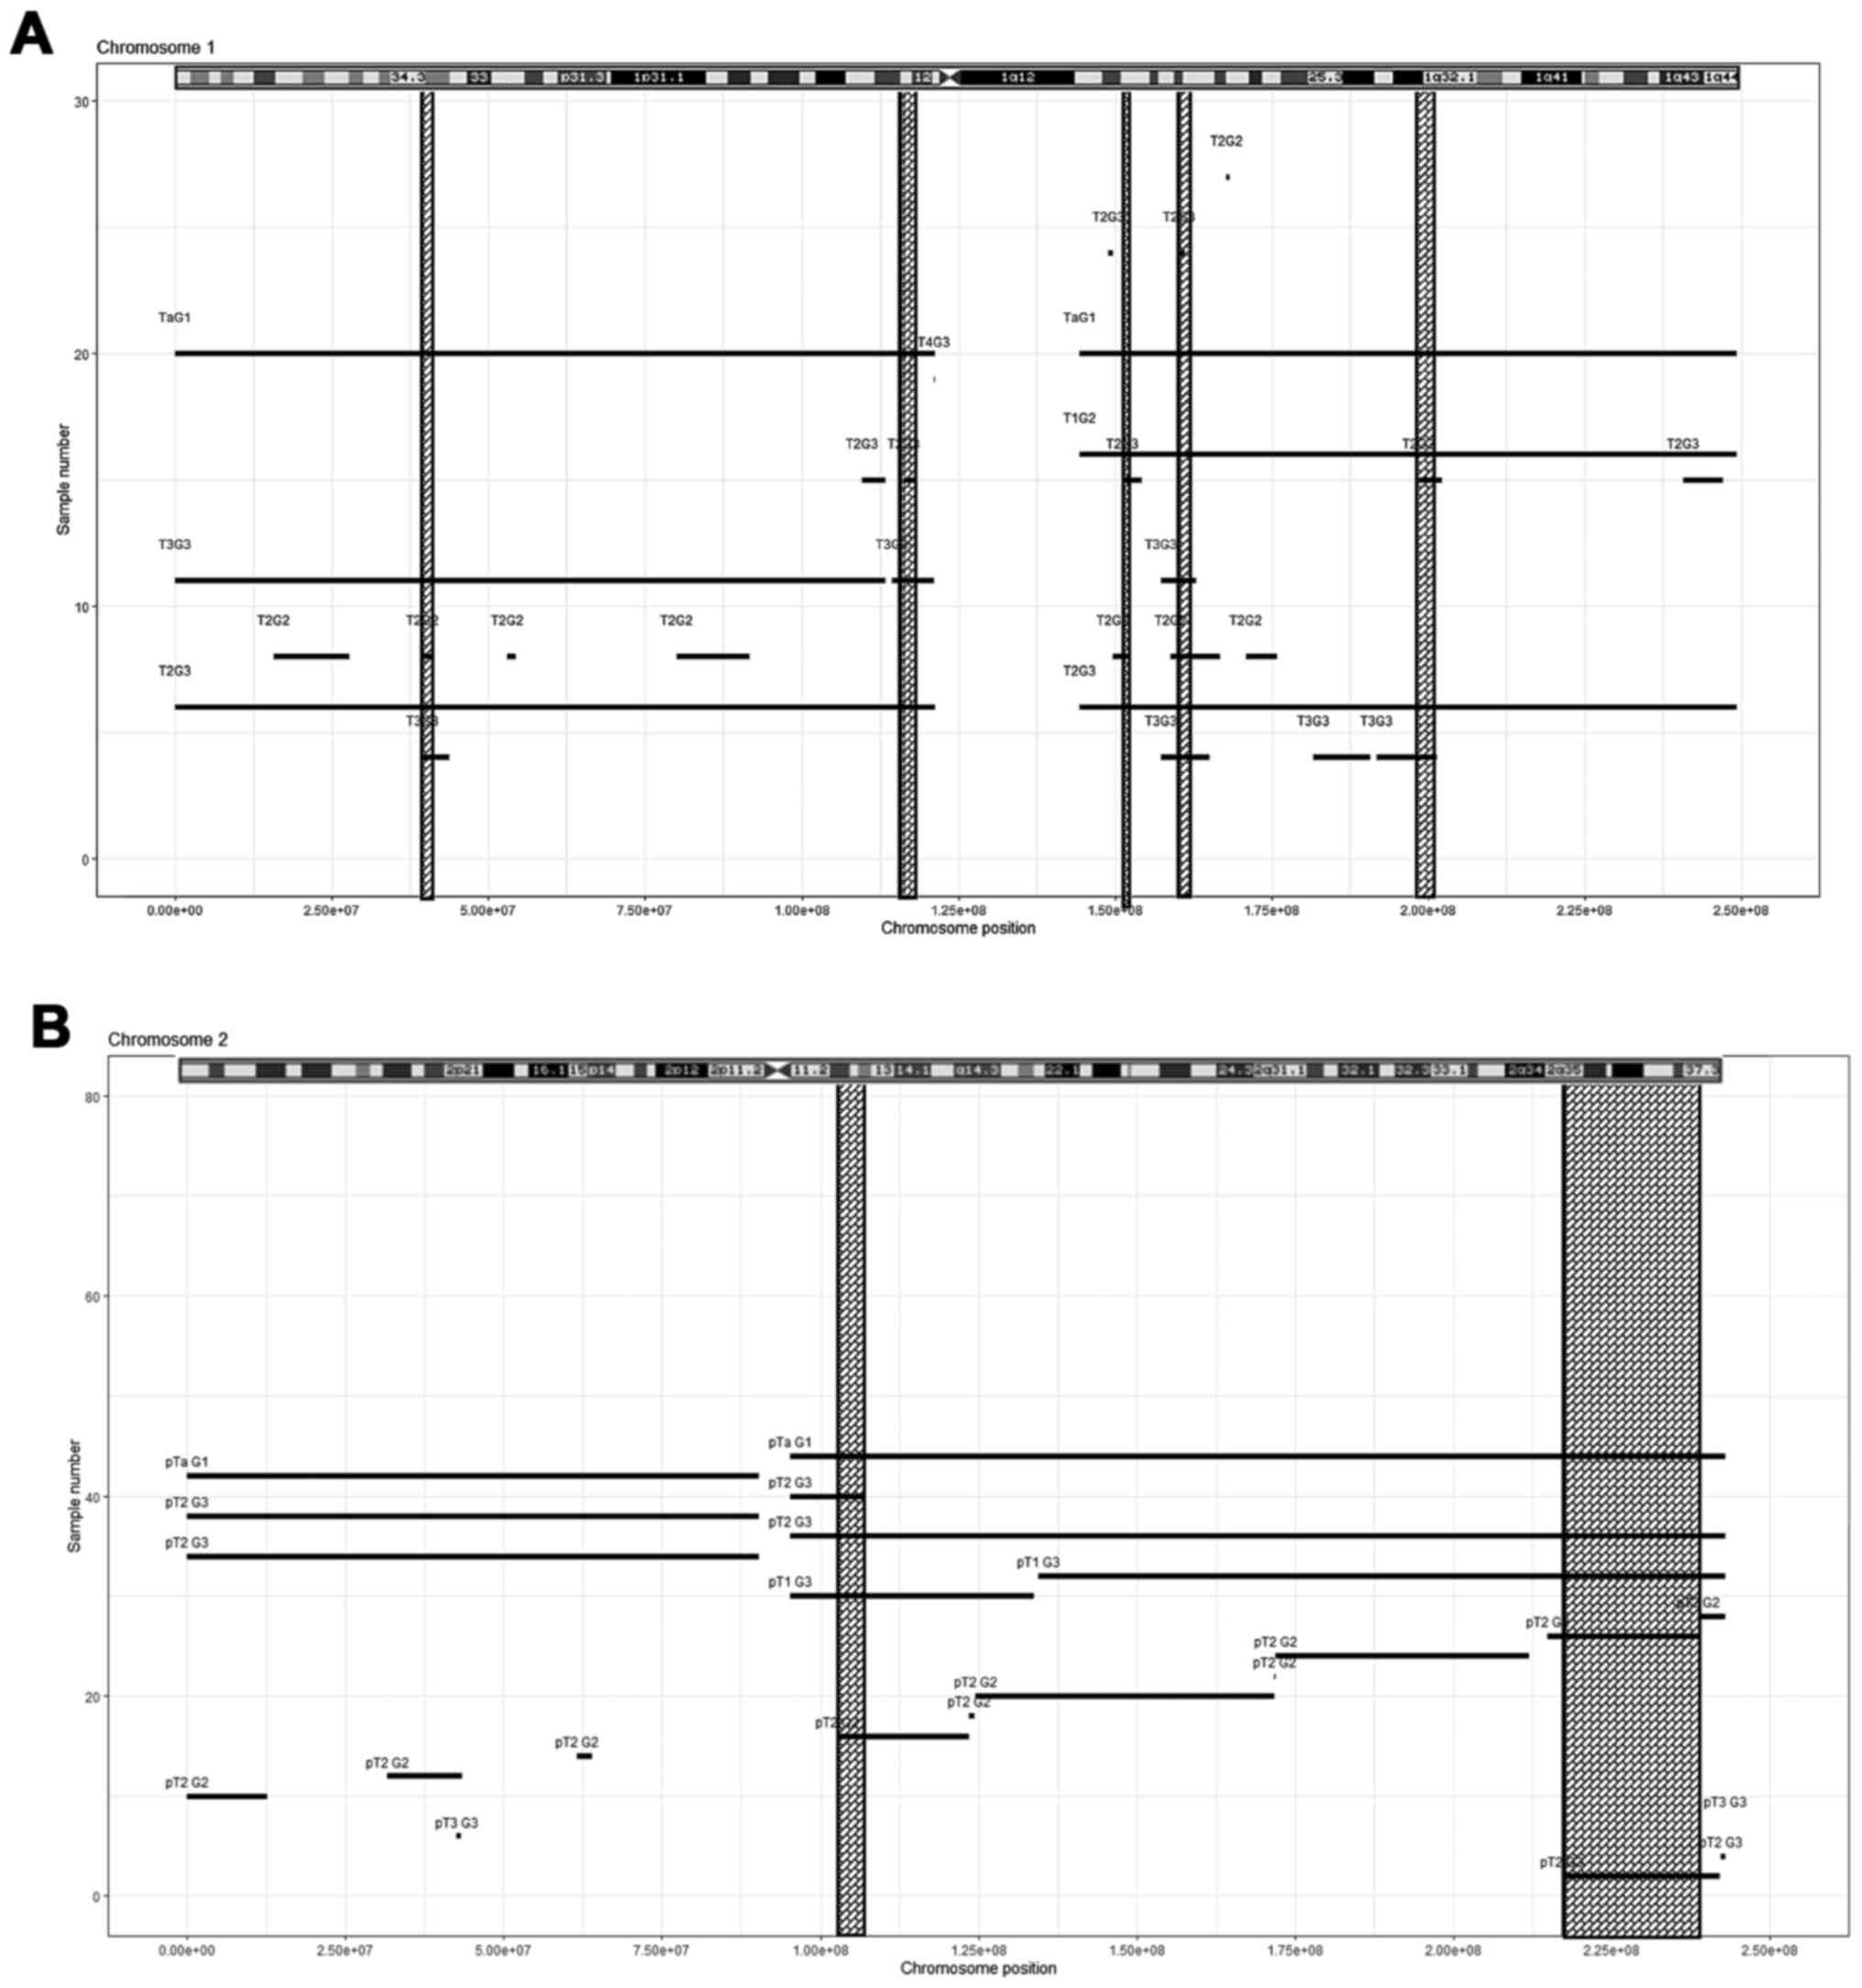 Clinical impact of copy number variation changes in bladder cancer samples